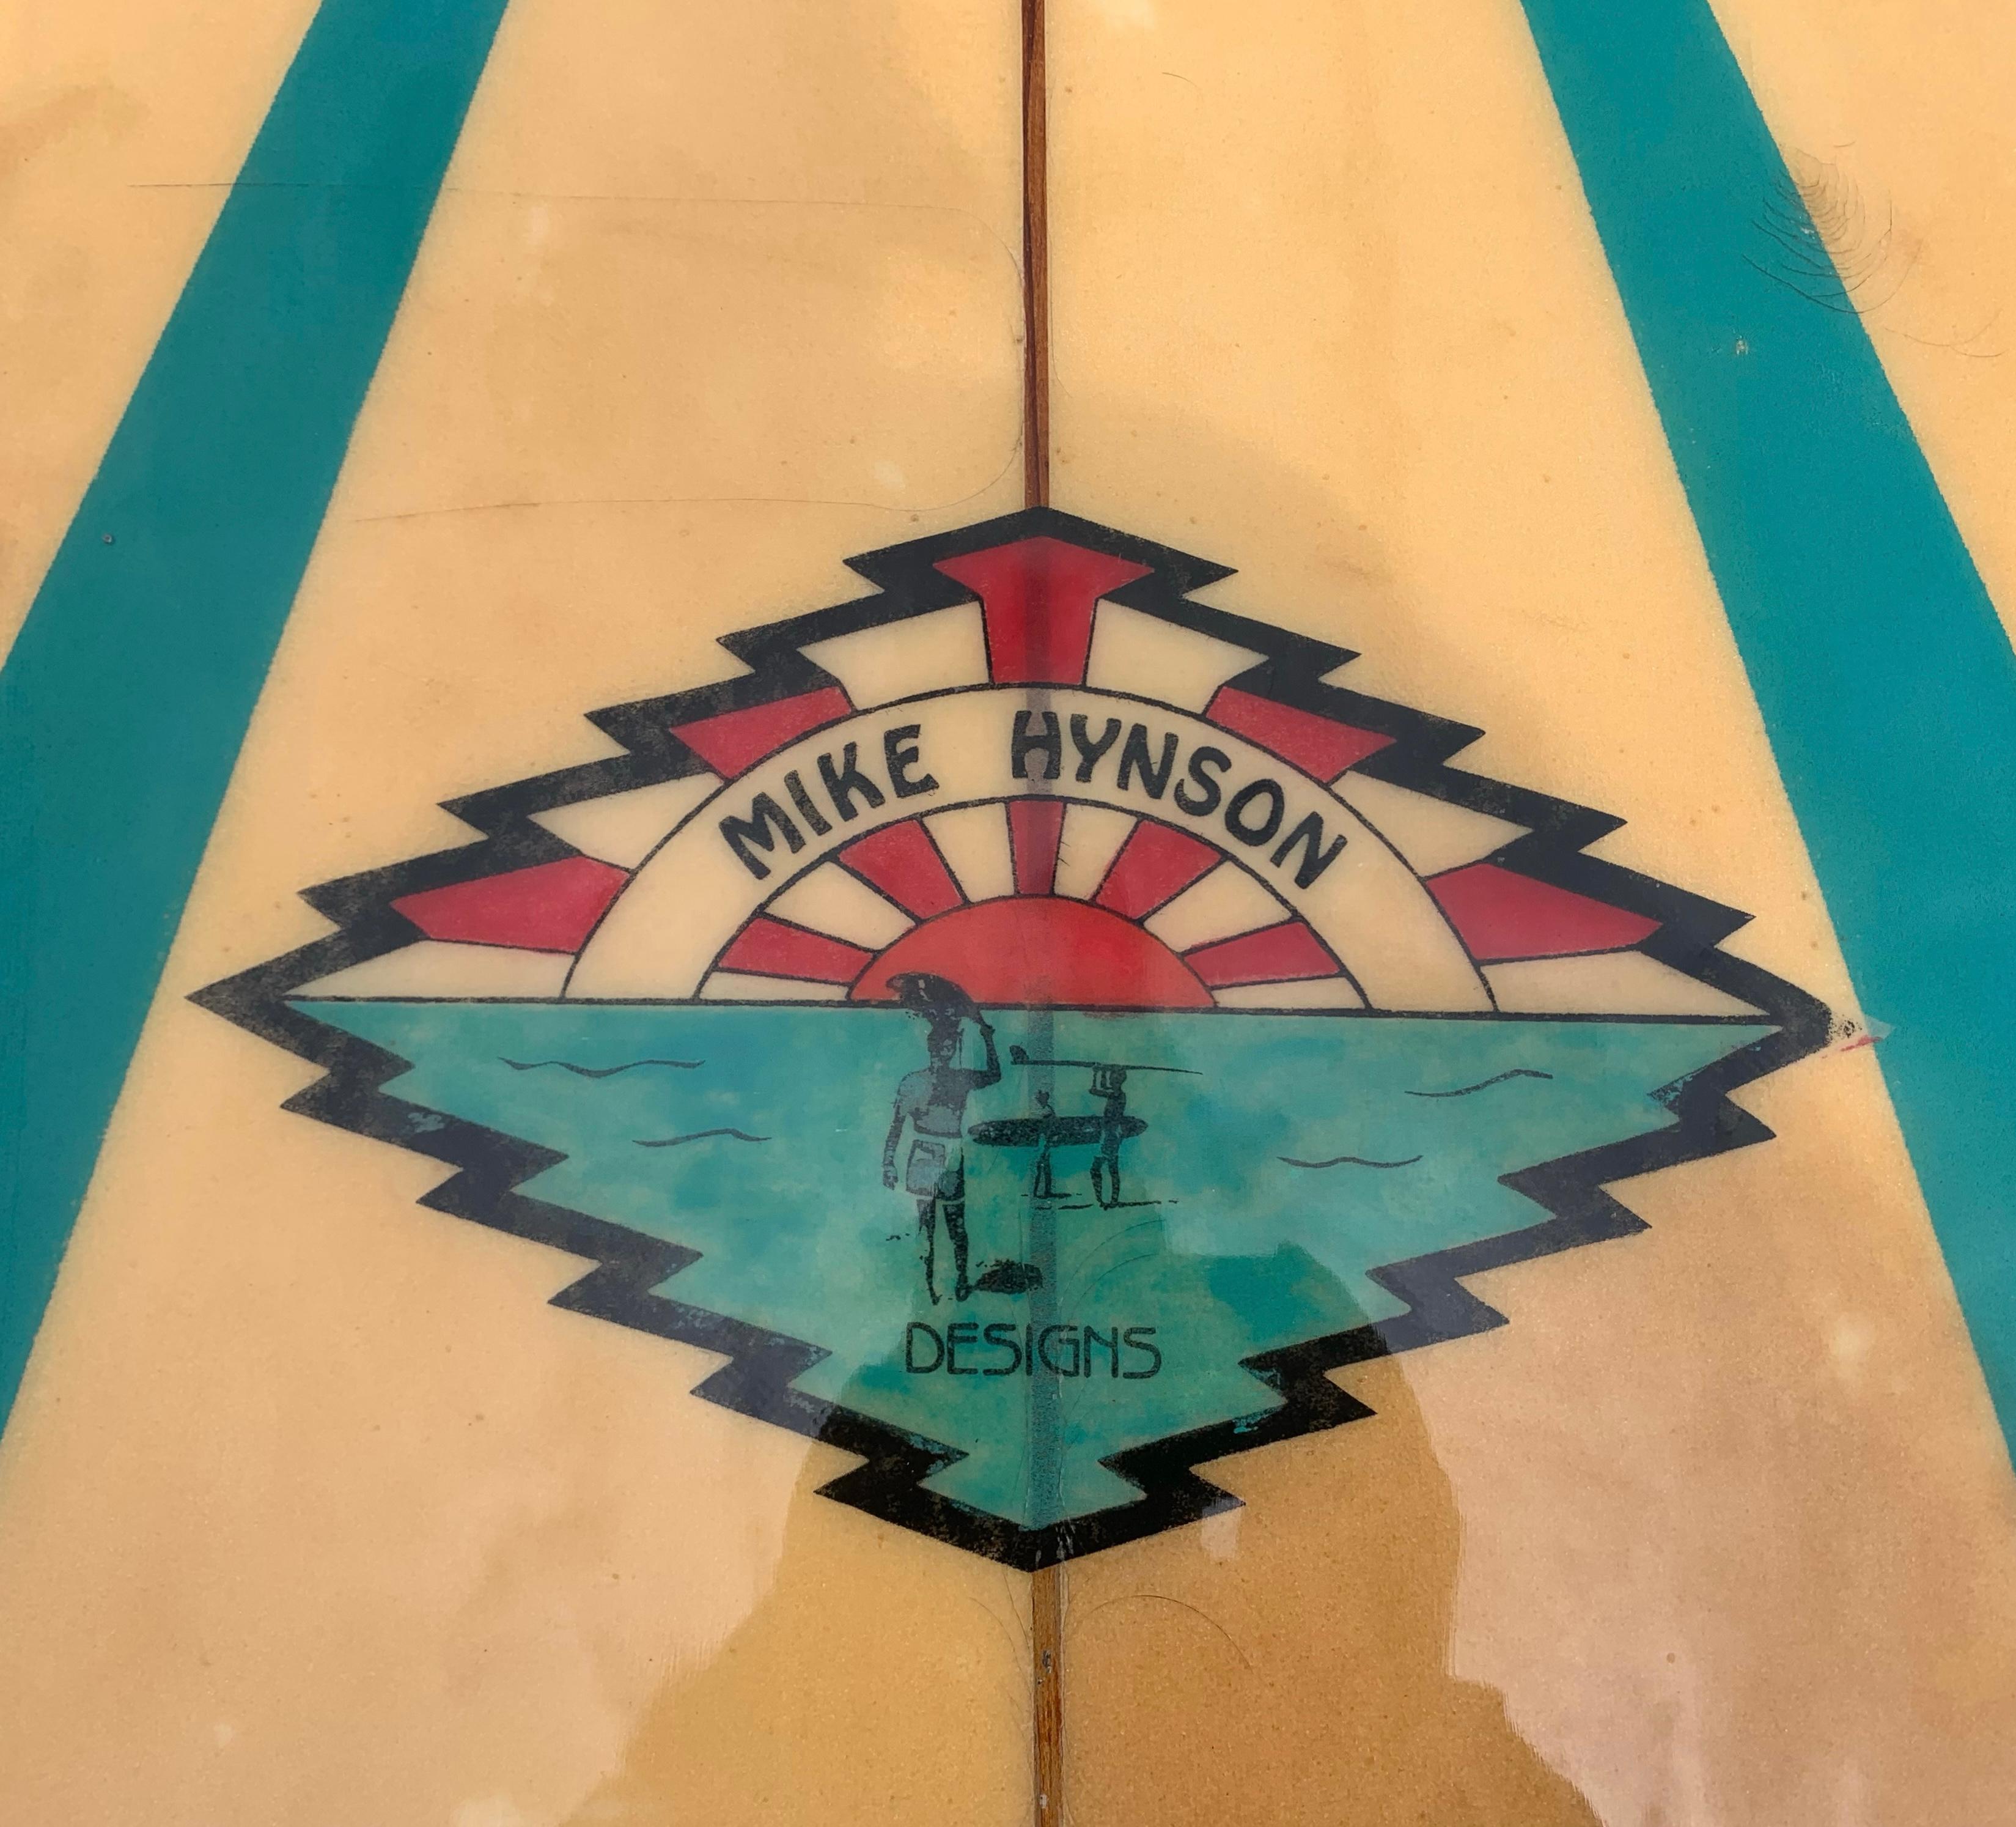 mike hynson surfboards for sale